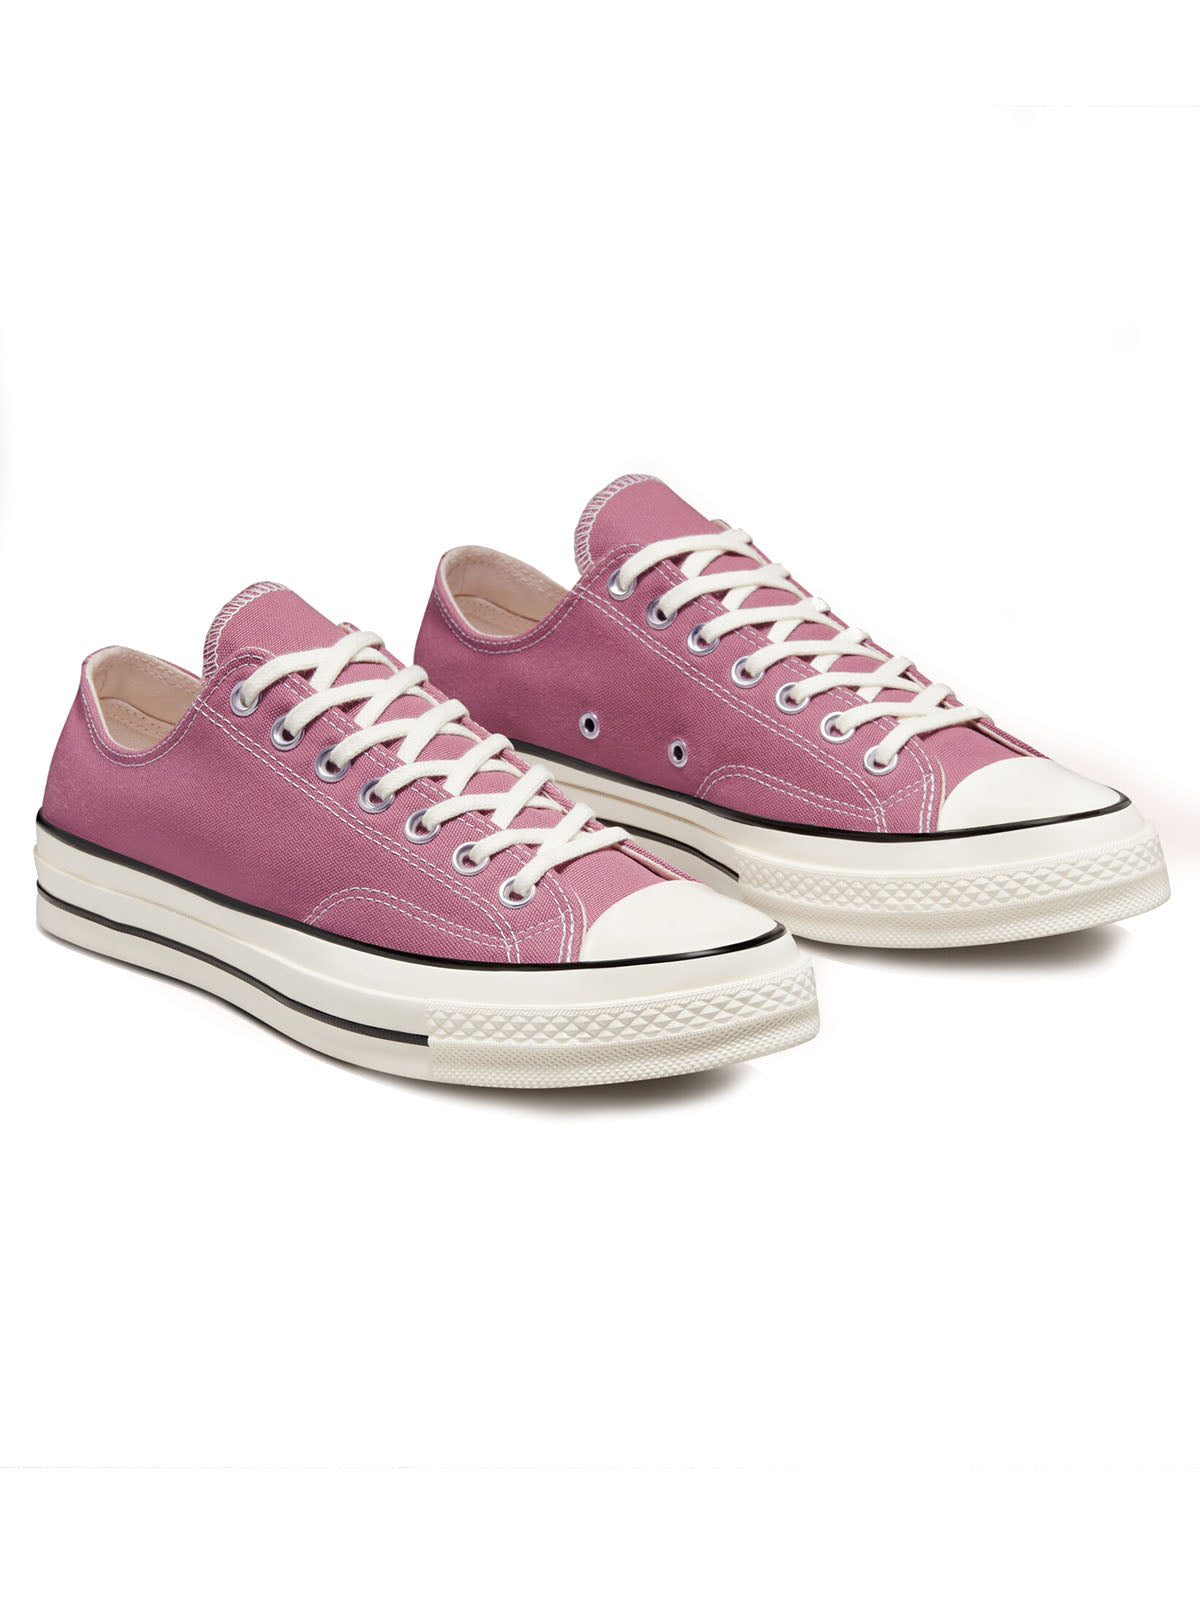 Converse Women's Sneaker - Converse Chuck 70 Recycled Rpet Canvas Low Top - Pink